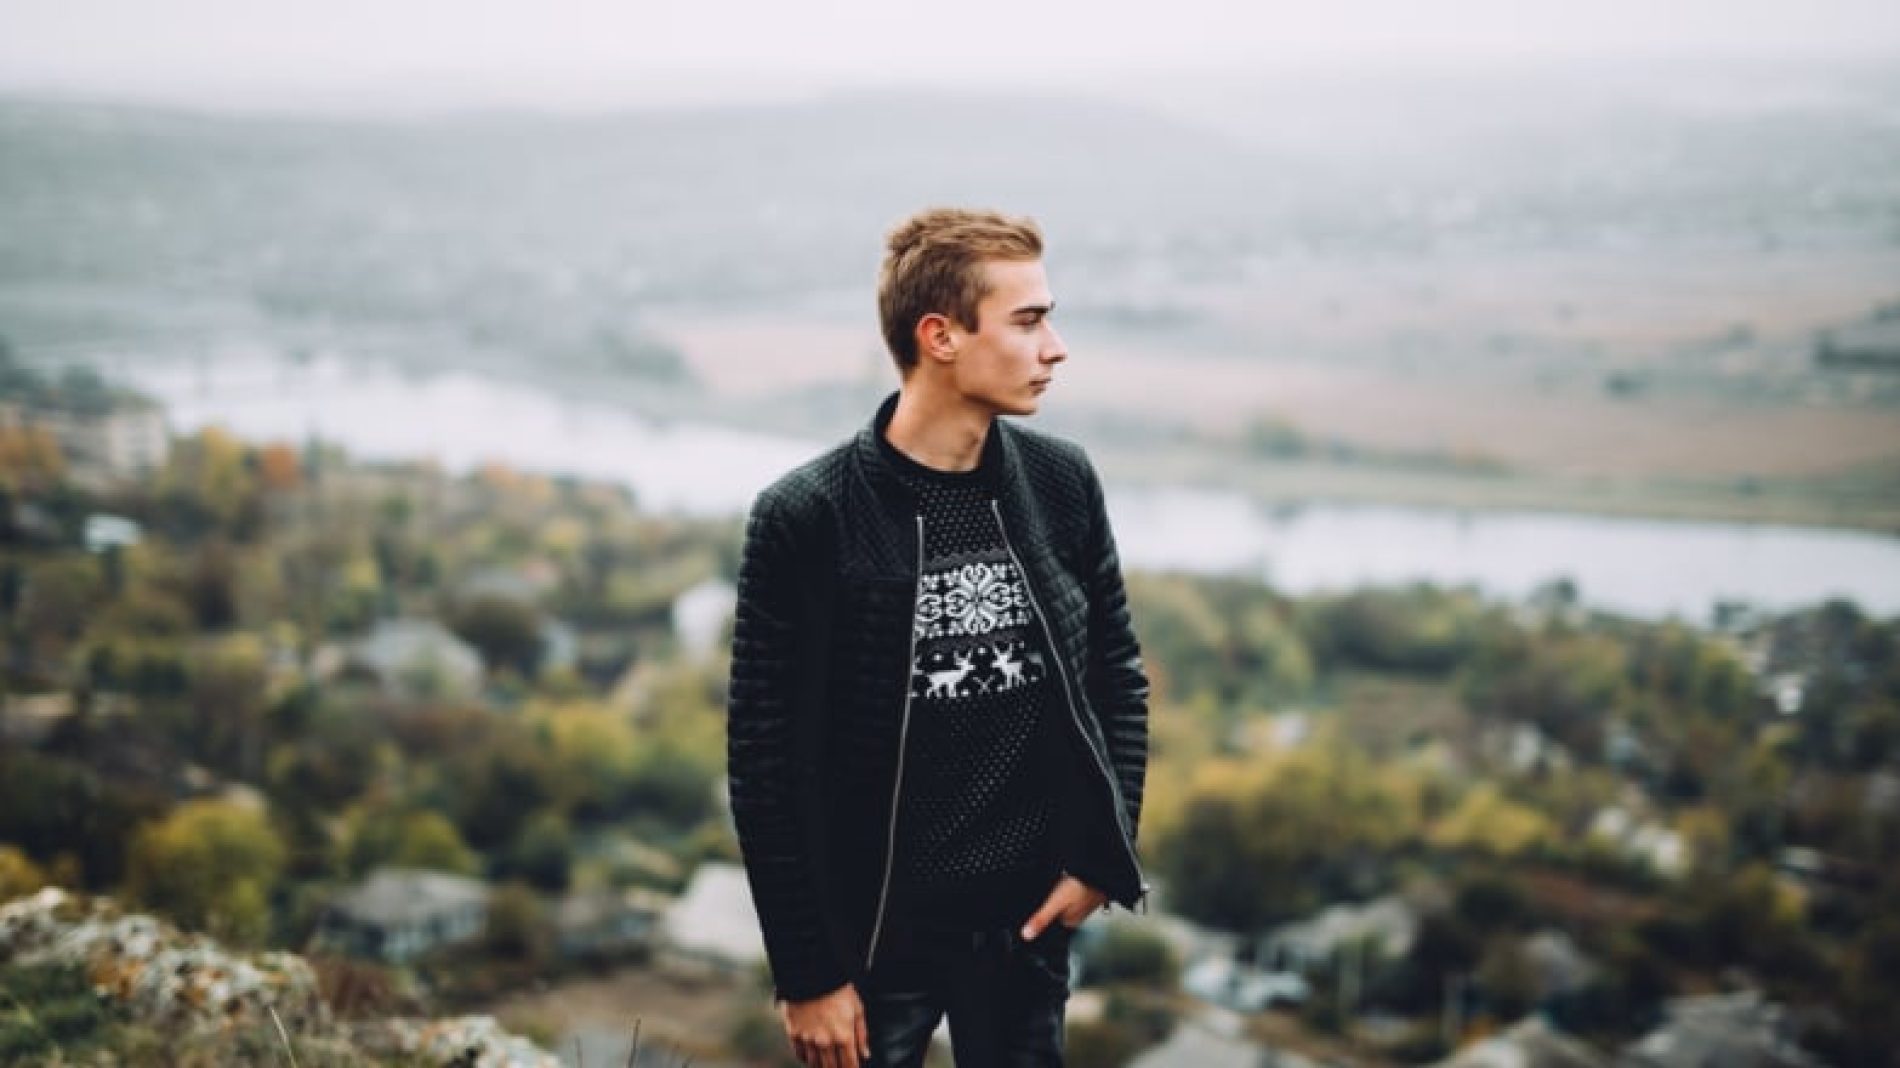 Young-man-on-a-hill-looking-at-the-view-CjFlfZ